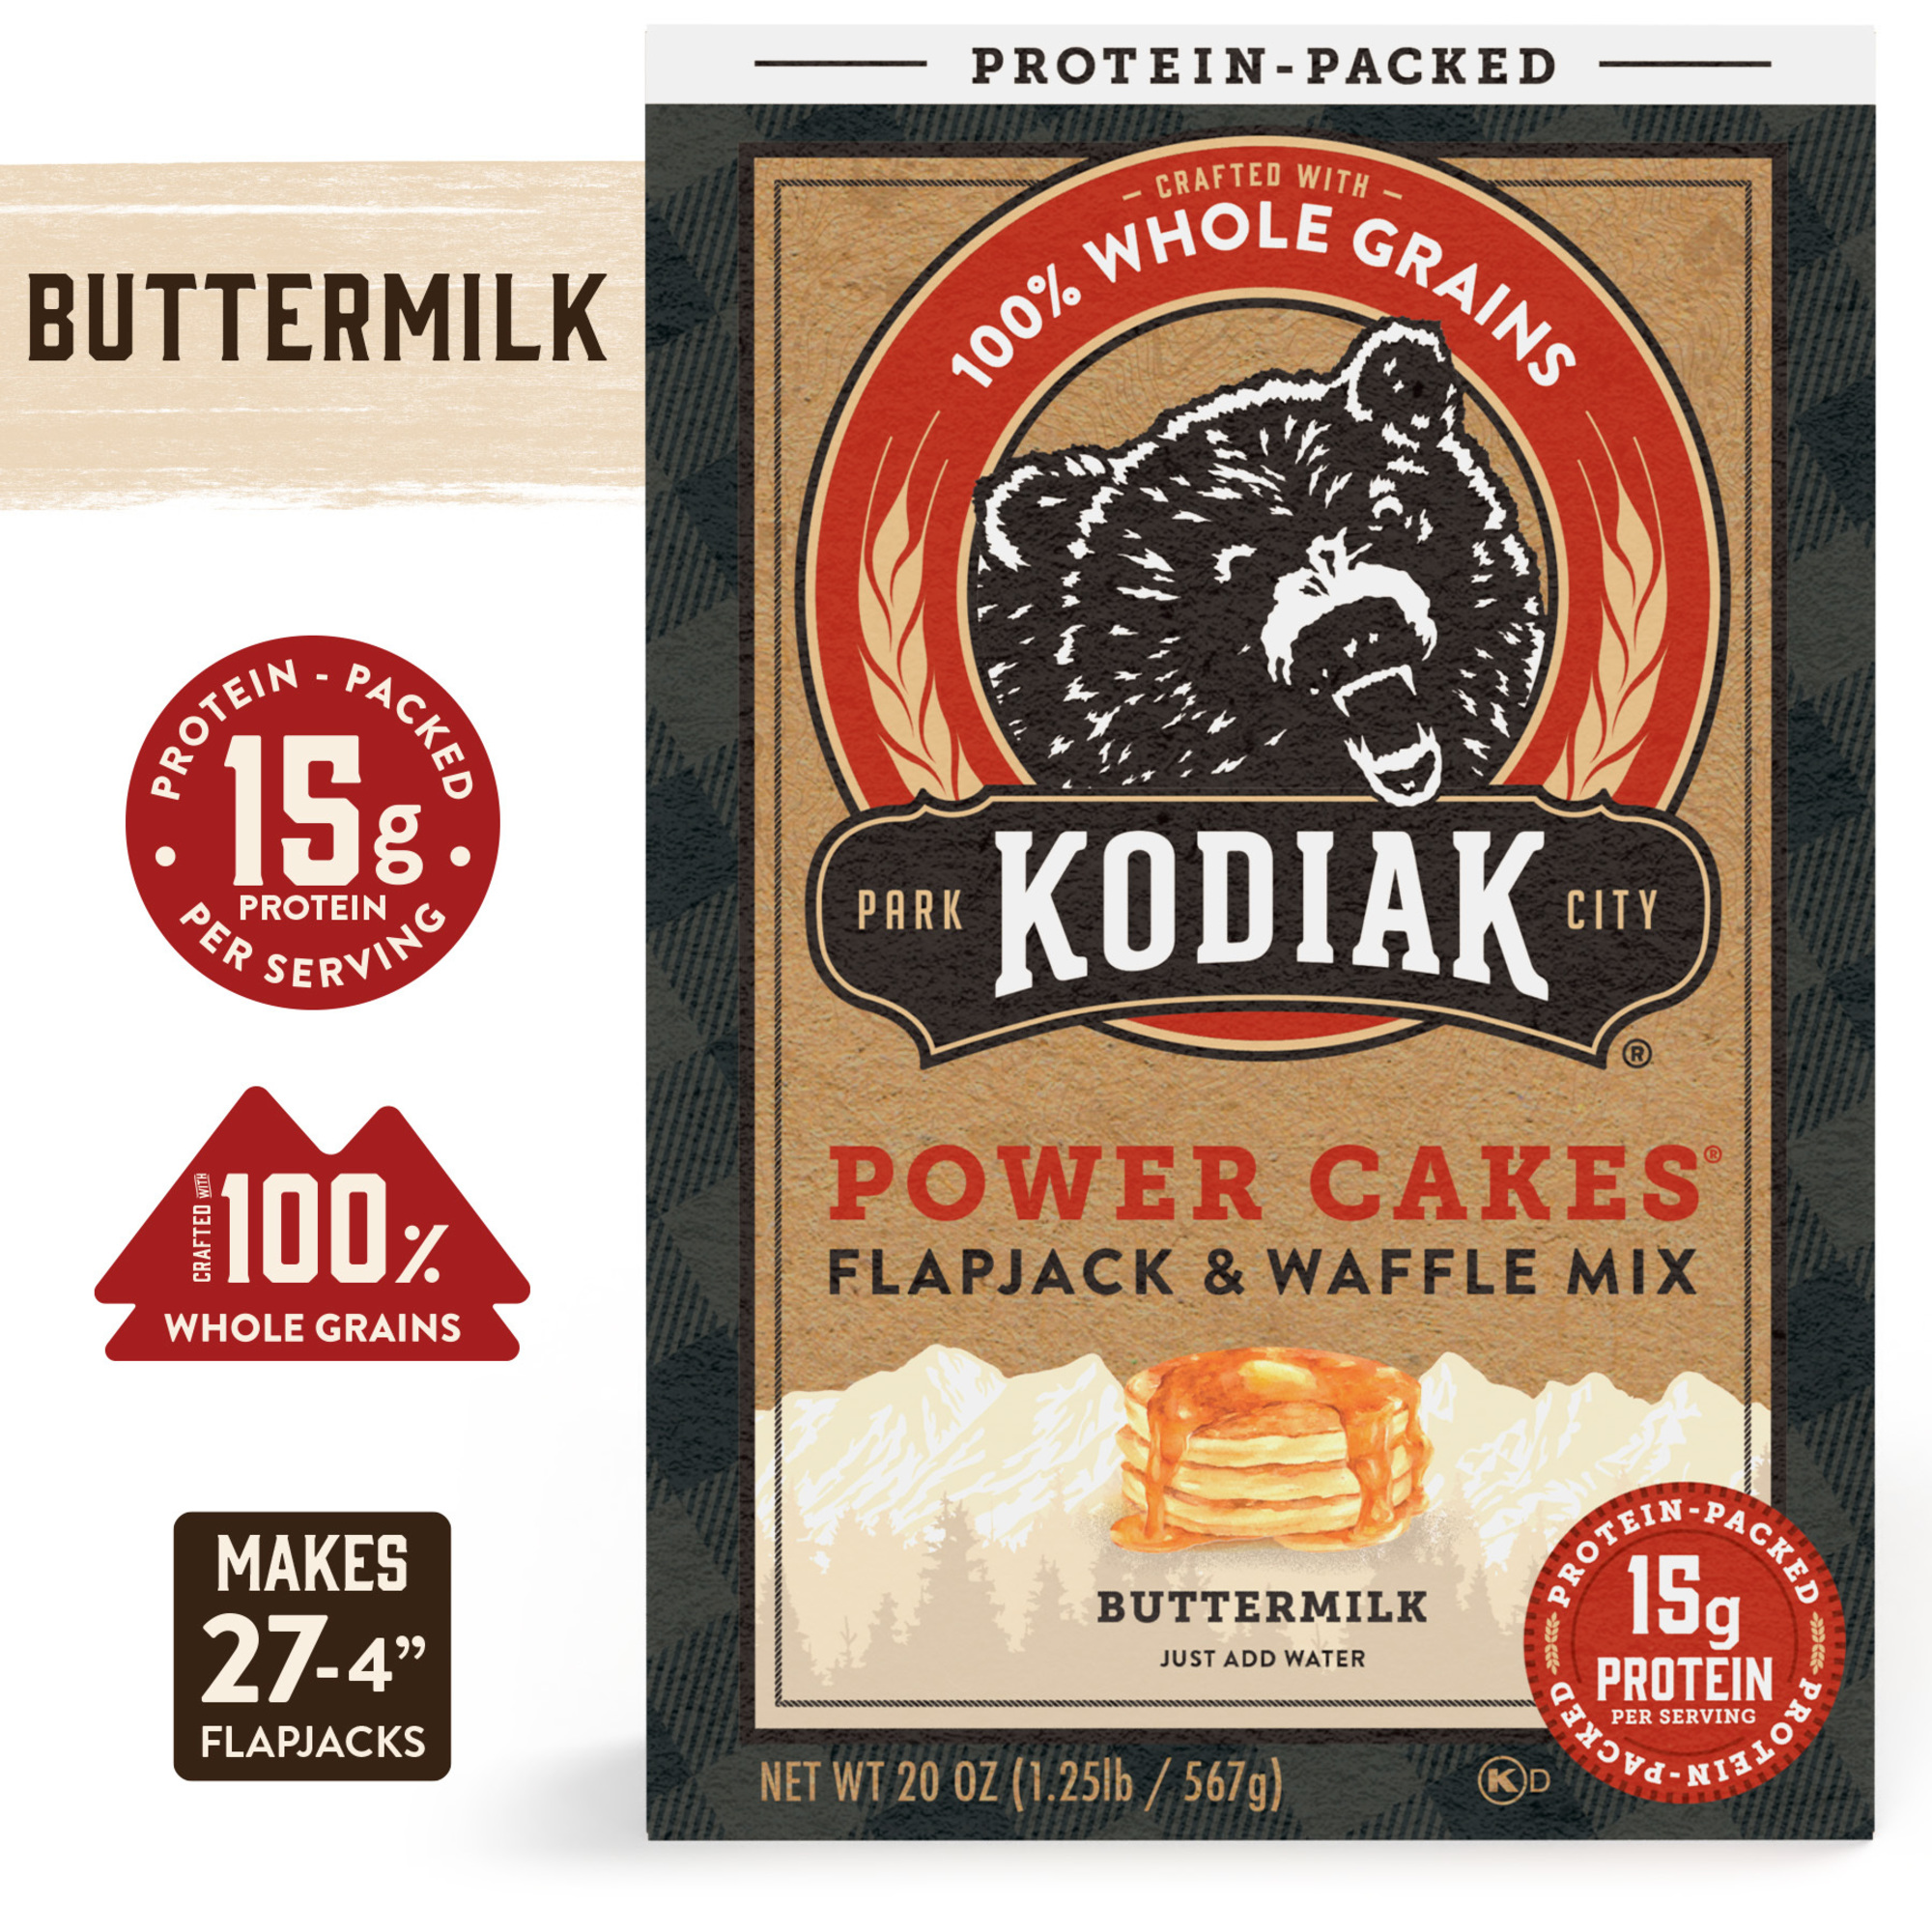 Kodiak Protein-Packed Power Cakes Buttermilk Flapjack and Waffle Mix, 20 oz Box - image 2 of 9